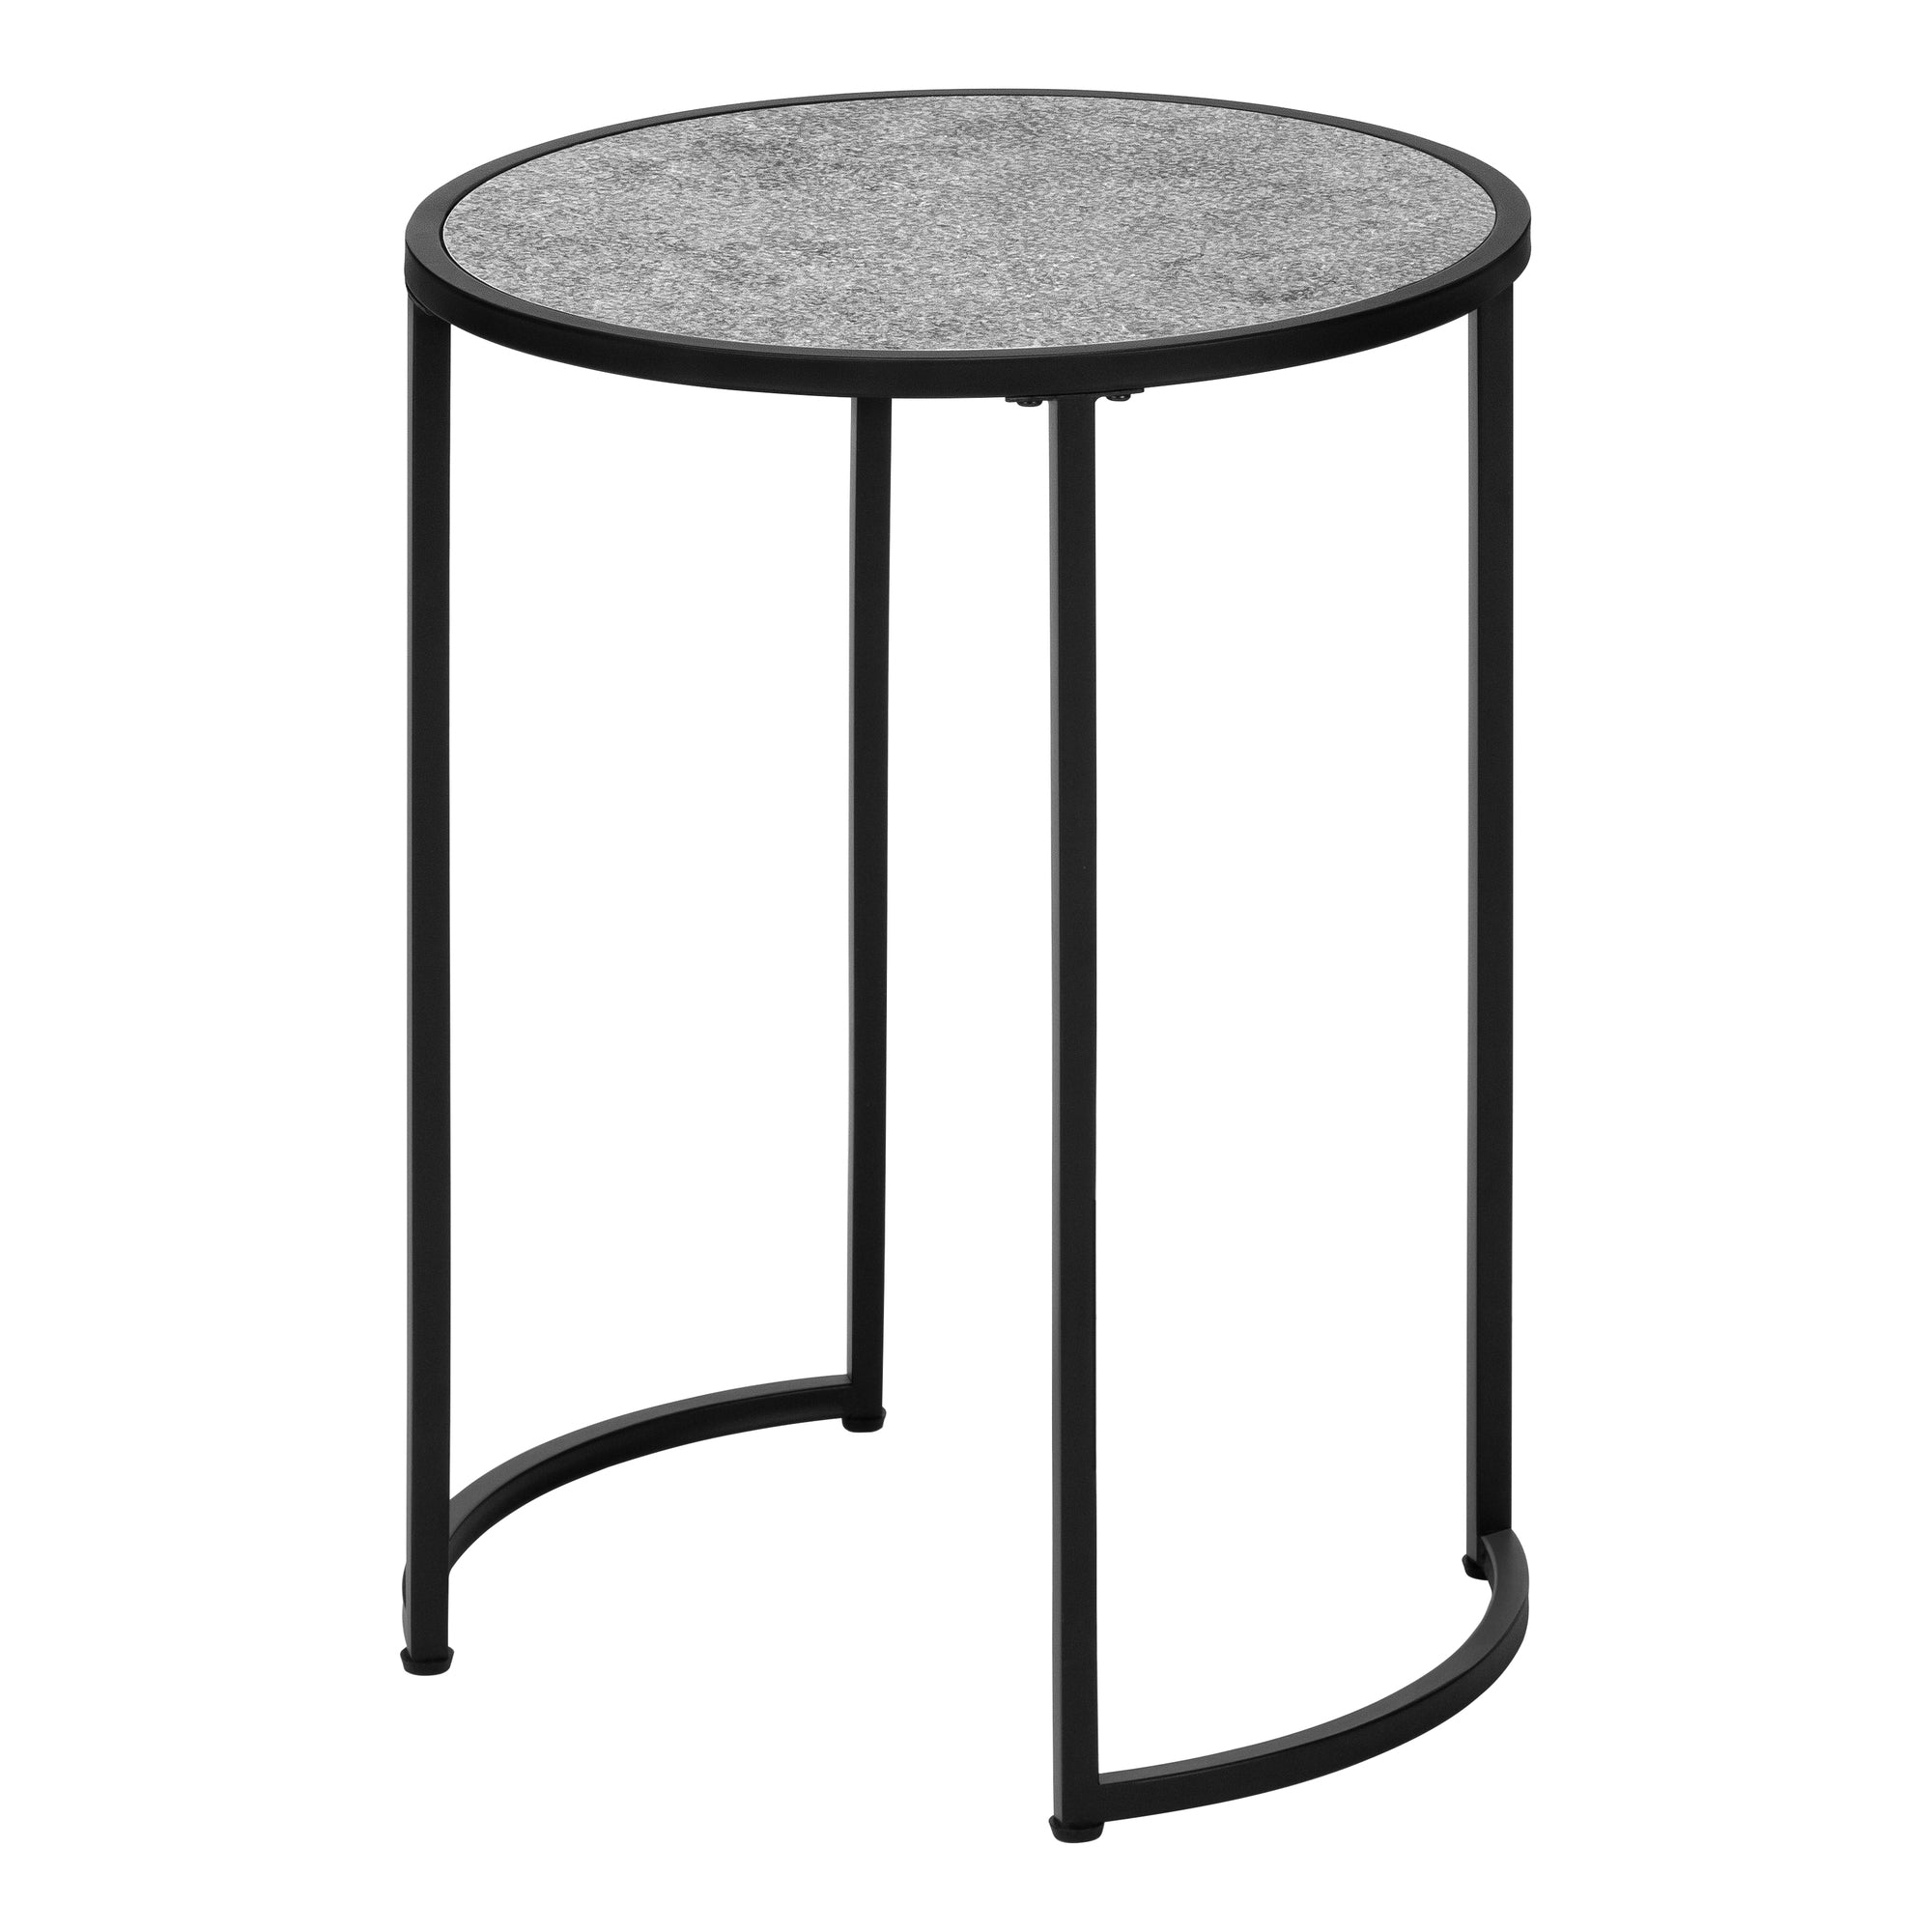 MN-512206    Accent Table, Side, End, Nightstand, Lamp, Living Room, Bedroom, Metal Base, Laminate, Grey Stone Look, Black, Contemporary, Modern